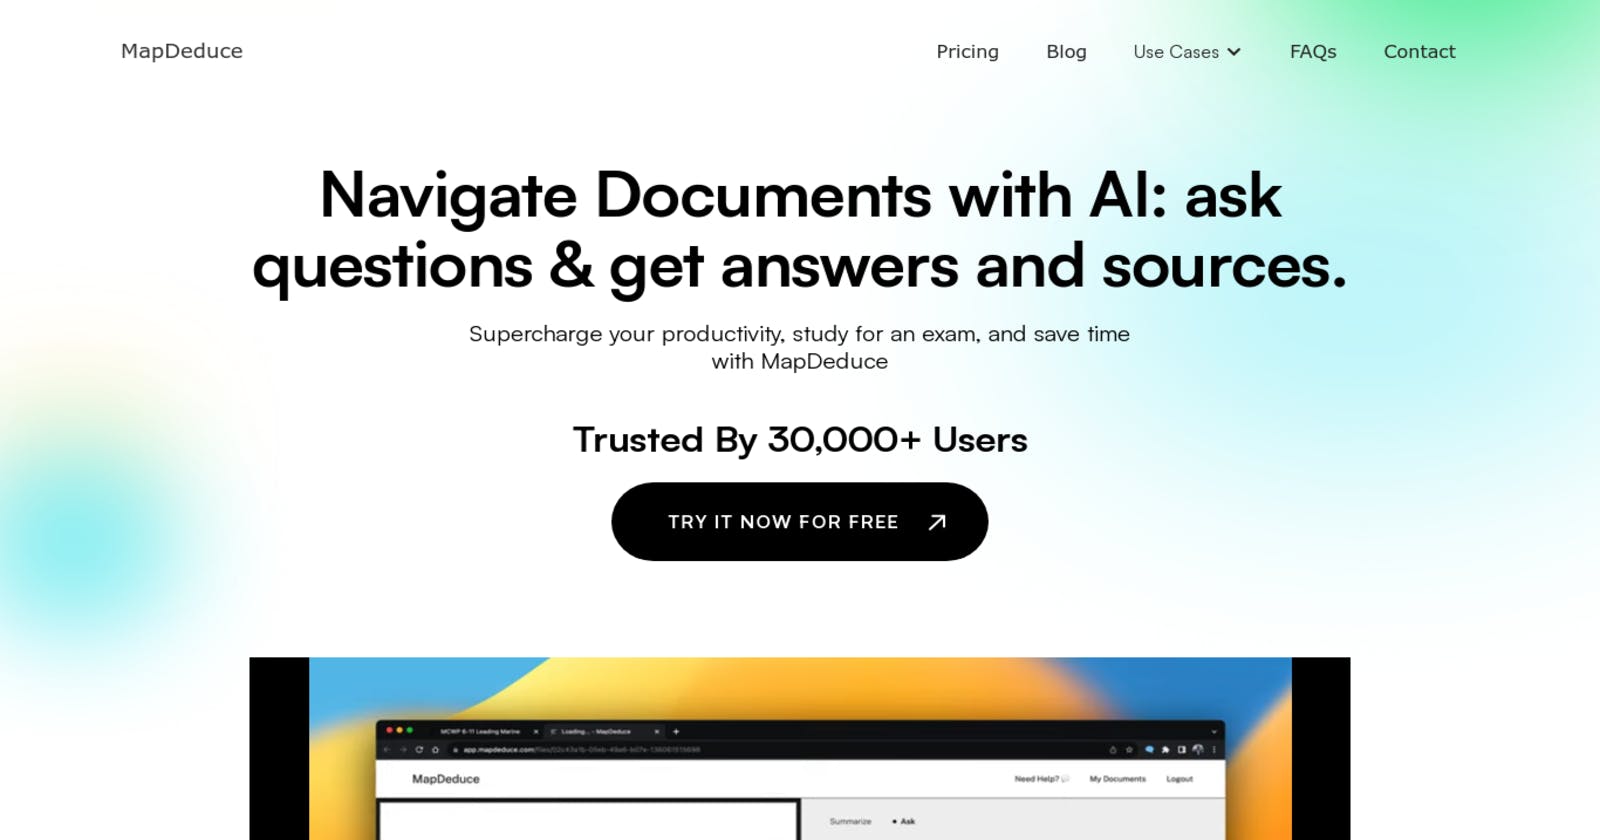 Introducing MapDeduce - Your AI-Powered Document Navigator